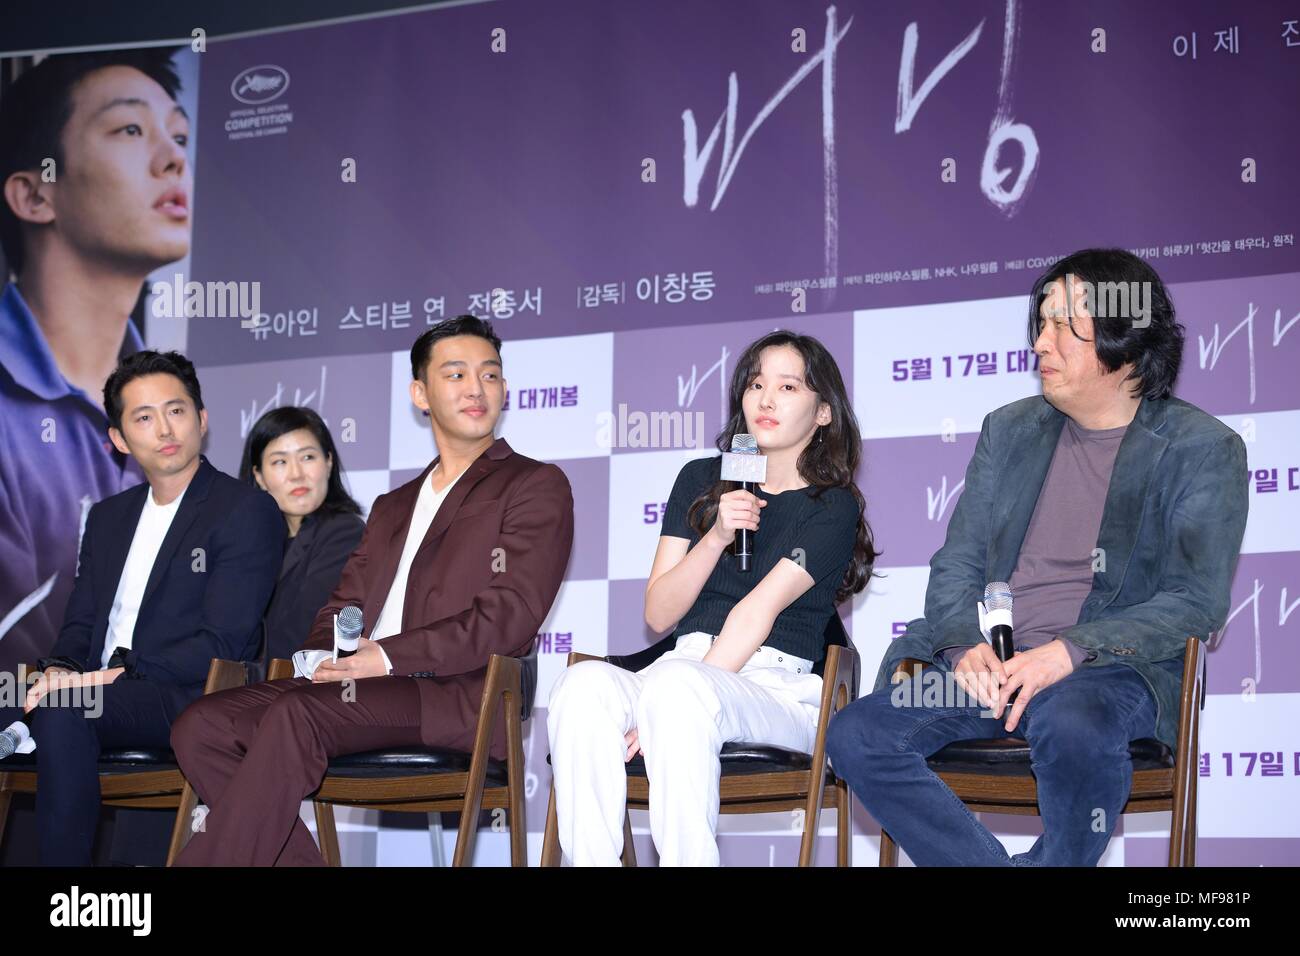 Seoul, Korea. 24th Apr, 2018. Director Lee Chang-dong and main cast Yoo Ah-in, Jong-seo Jeon, Steven Yeun etc. attended the production conference of their new film 'Burning' in Seoul, Korea on 24th April, 2018.(China and Korea Rights Out) Credit: TopPhoto/Alamy Live News Stock Photo